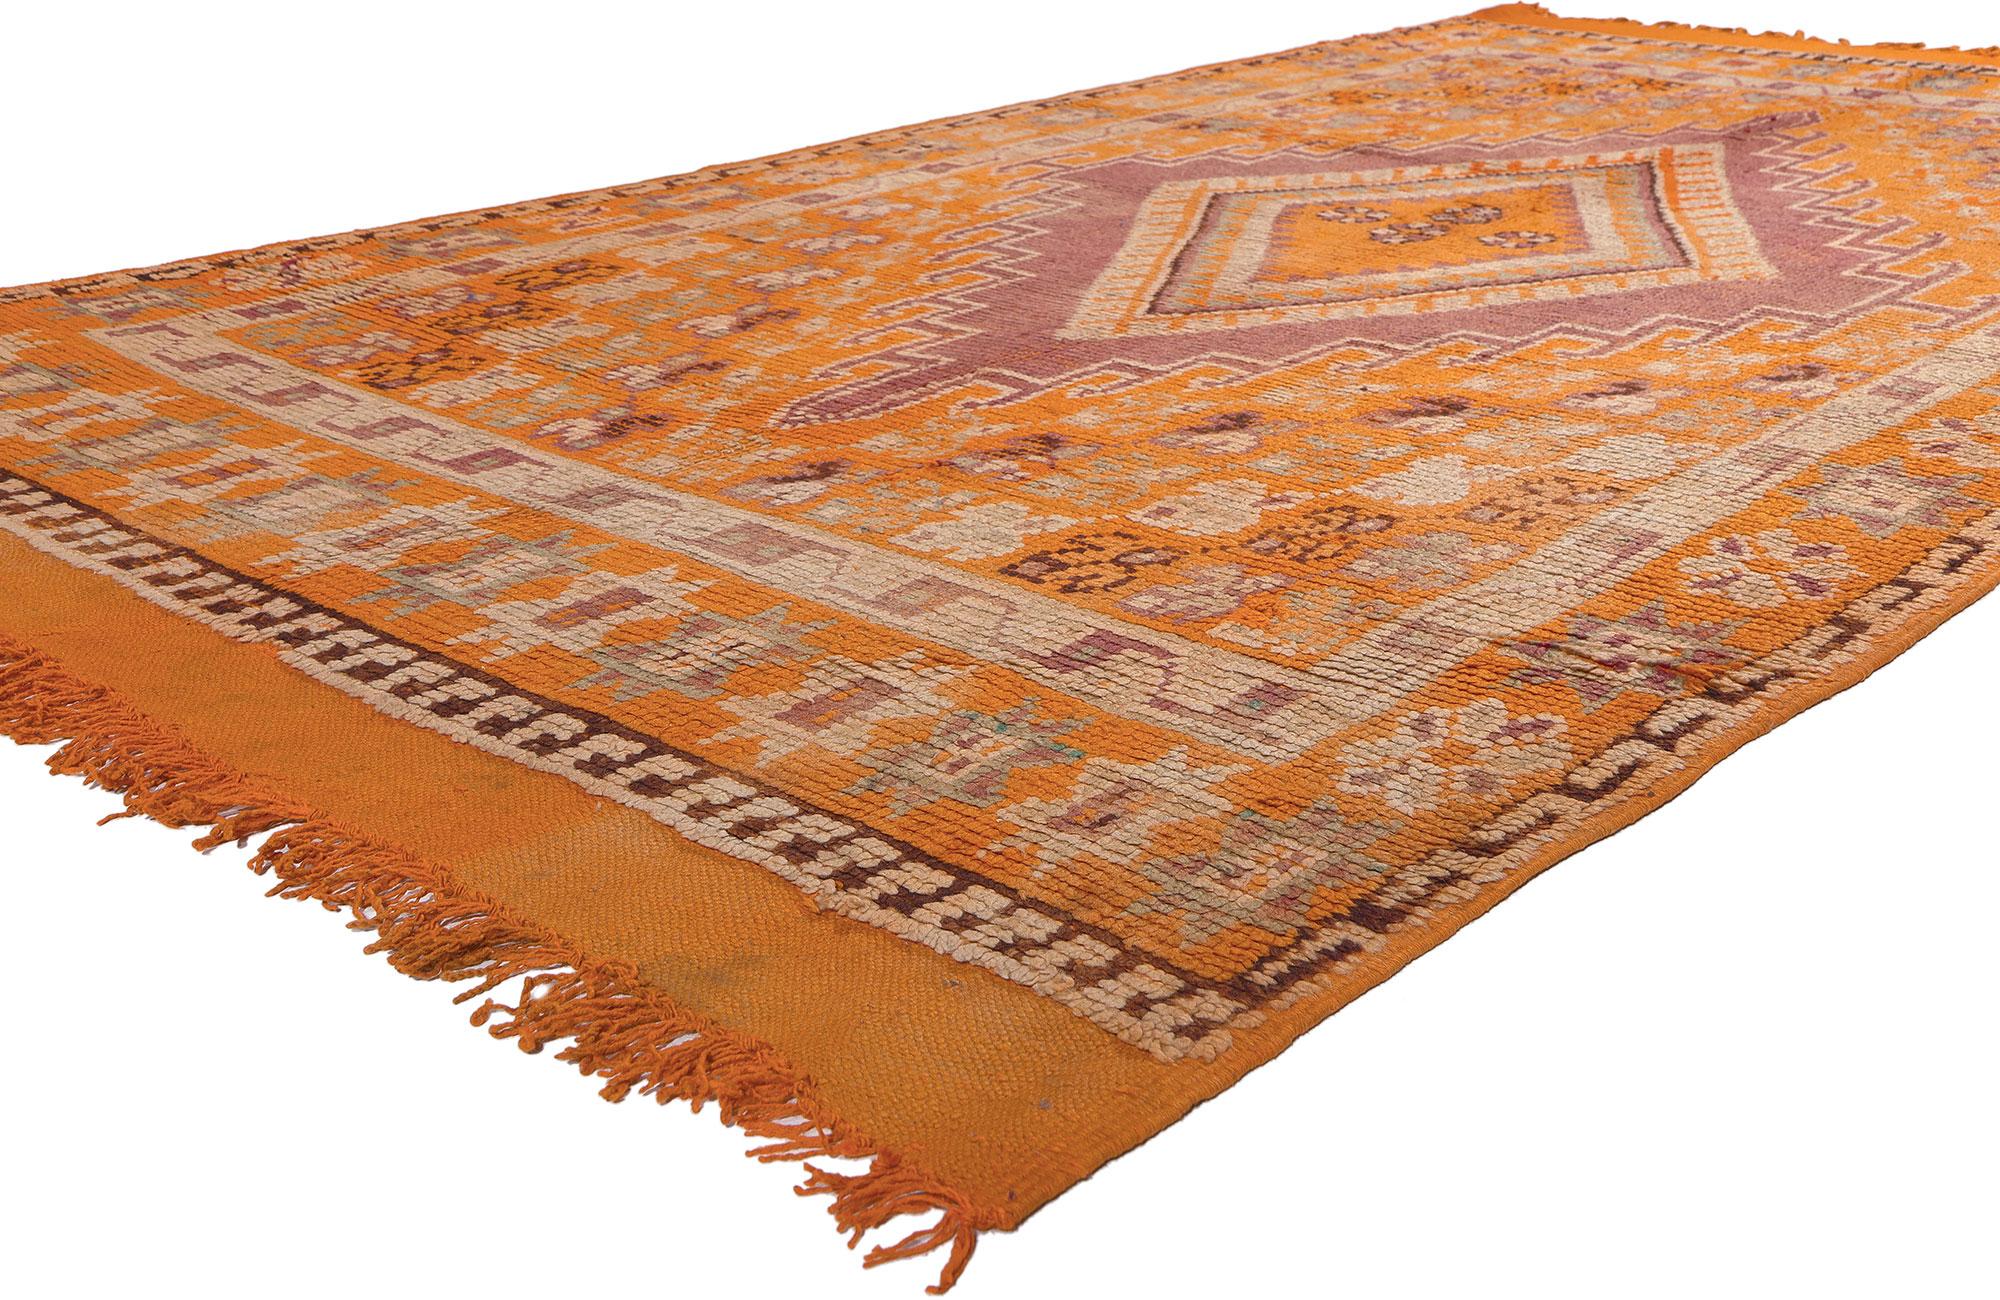 20229 Vintage Orange Taznakht Moroccan Rug, 05'07 x 09'10.
Dive into the cultural tapestry meticulously woven by the Taznakht Tribe, as they masterfully craft this hand-knotted wool vintage Berber Moroccan rug amidst the rugged terrain of the High